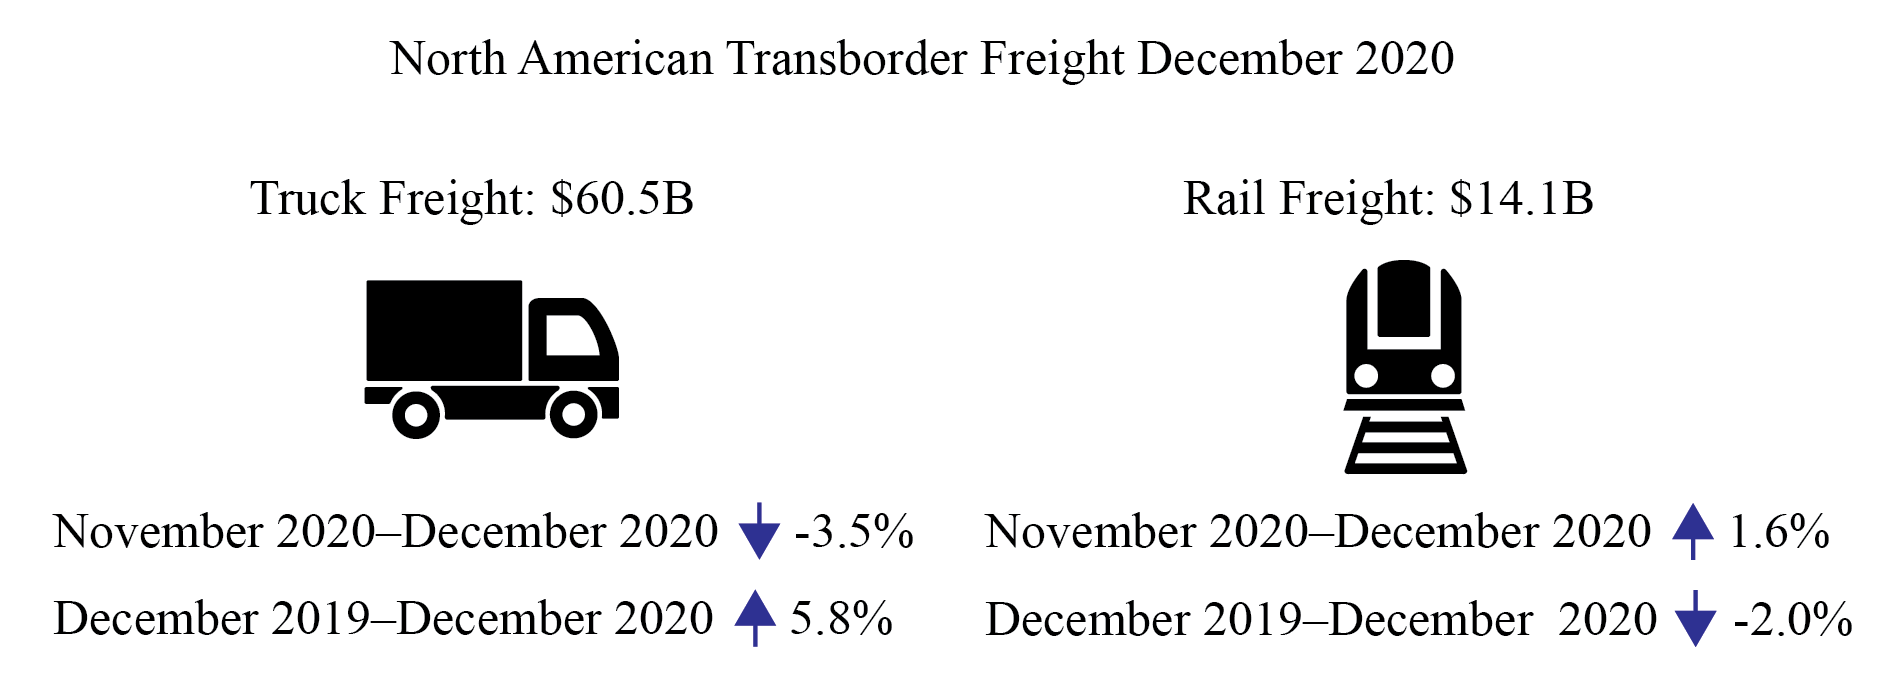 North American Freight Data, December 2020